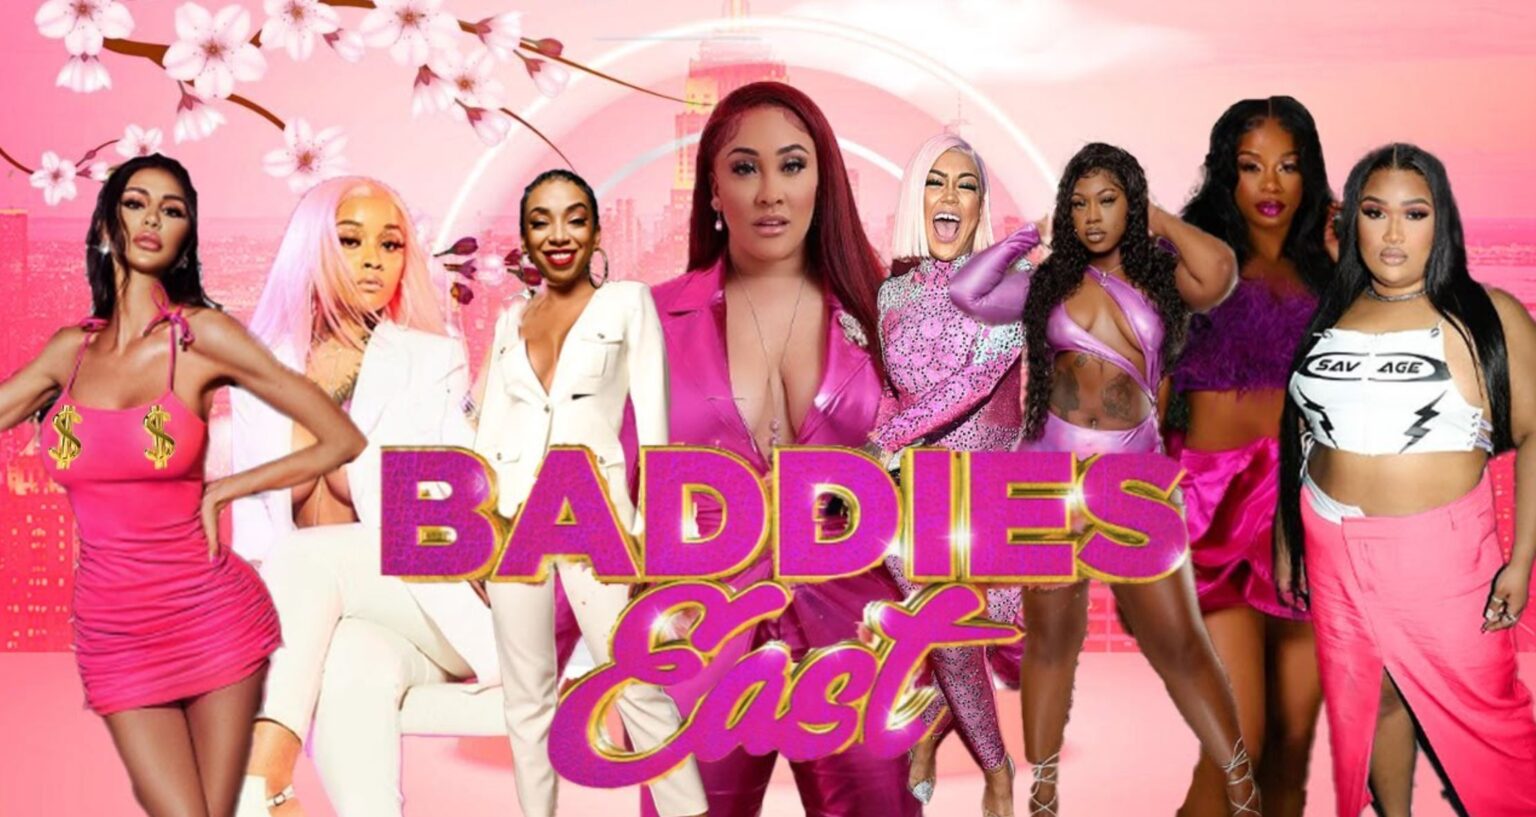 Wondering Where To Watch Baddies East In Canada? Here's How!